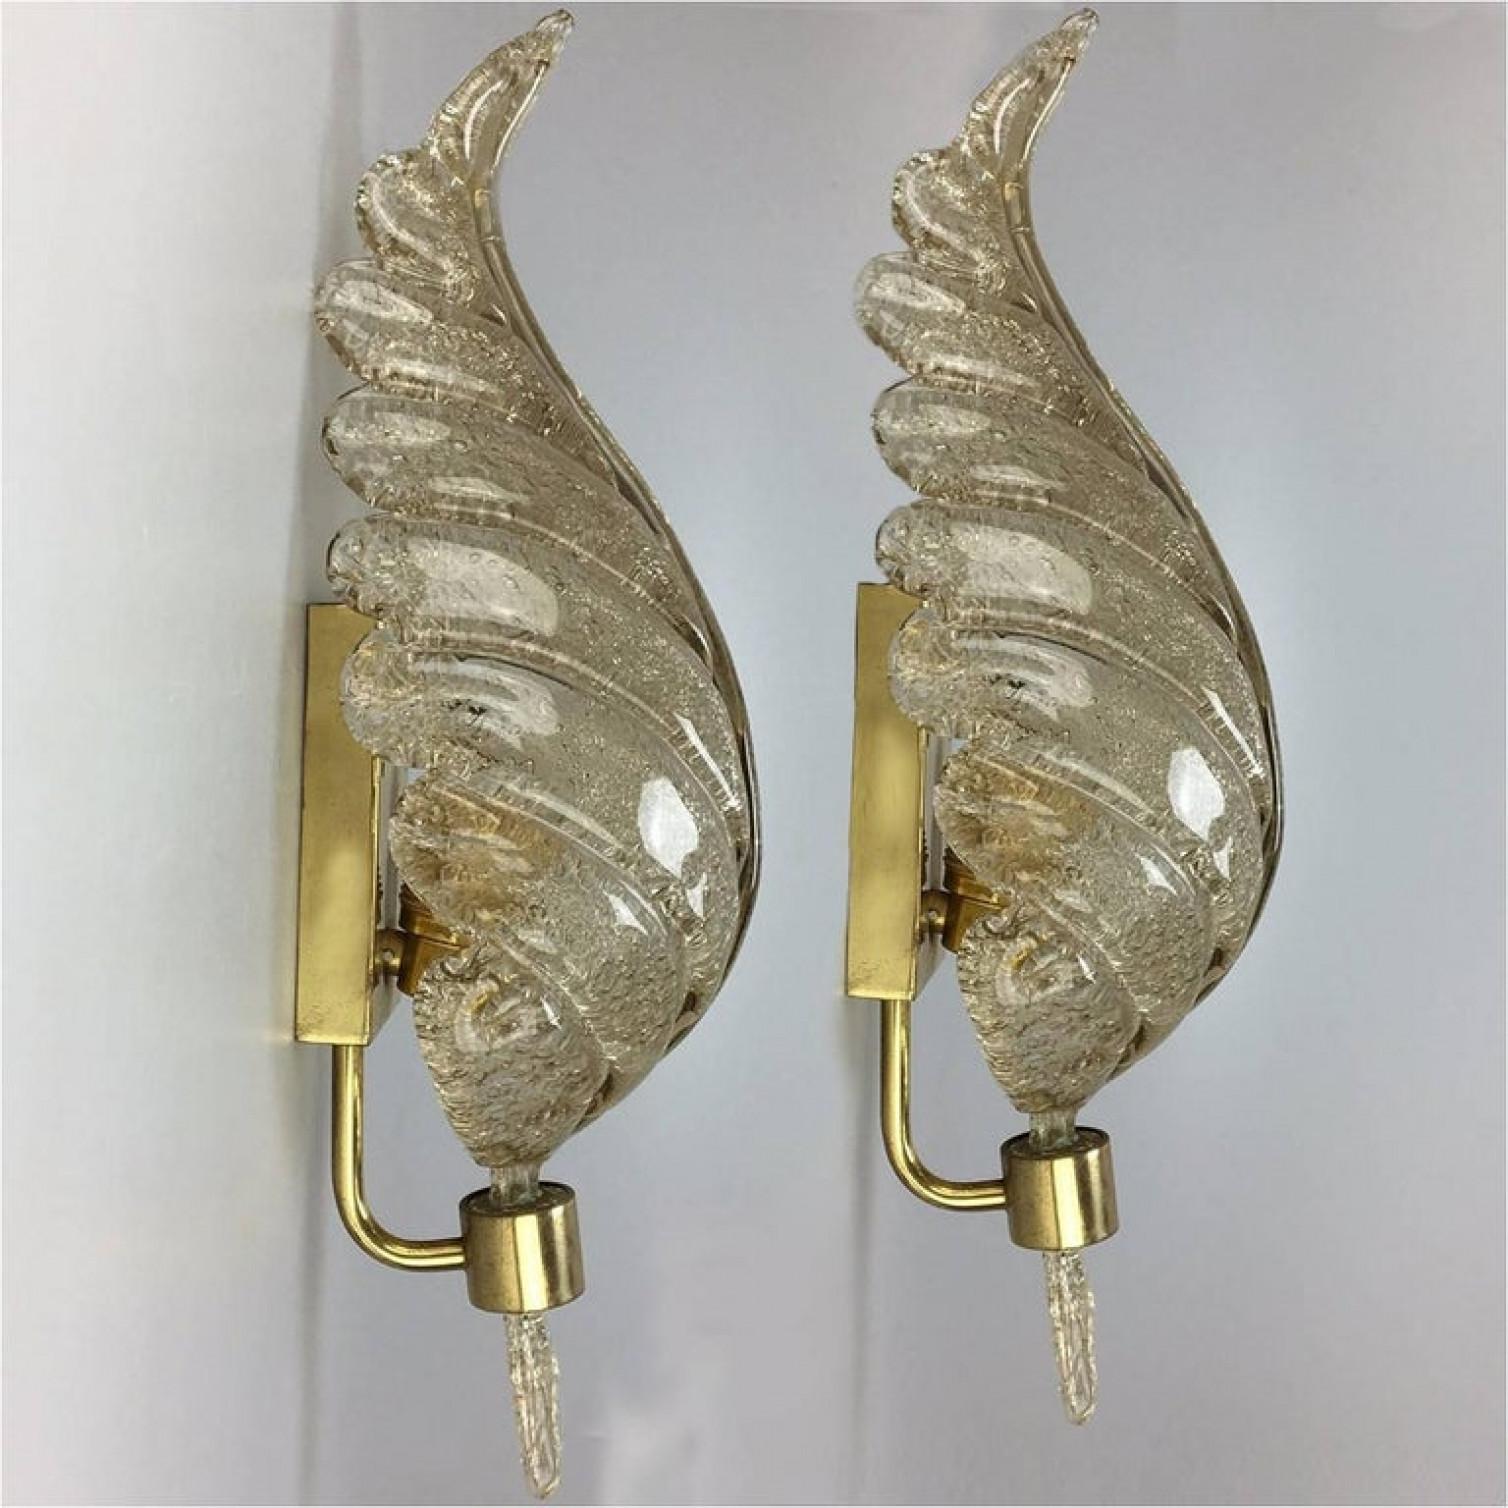 A pair of elegant and exquisite hand blown Murano glass Barovier & Toso wall sconces with special gold inclusions. Each light fixture consists one blown Murano glass leave. Mounted on a brass frame. The leaves refract light beautifully. The